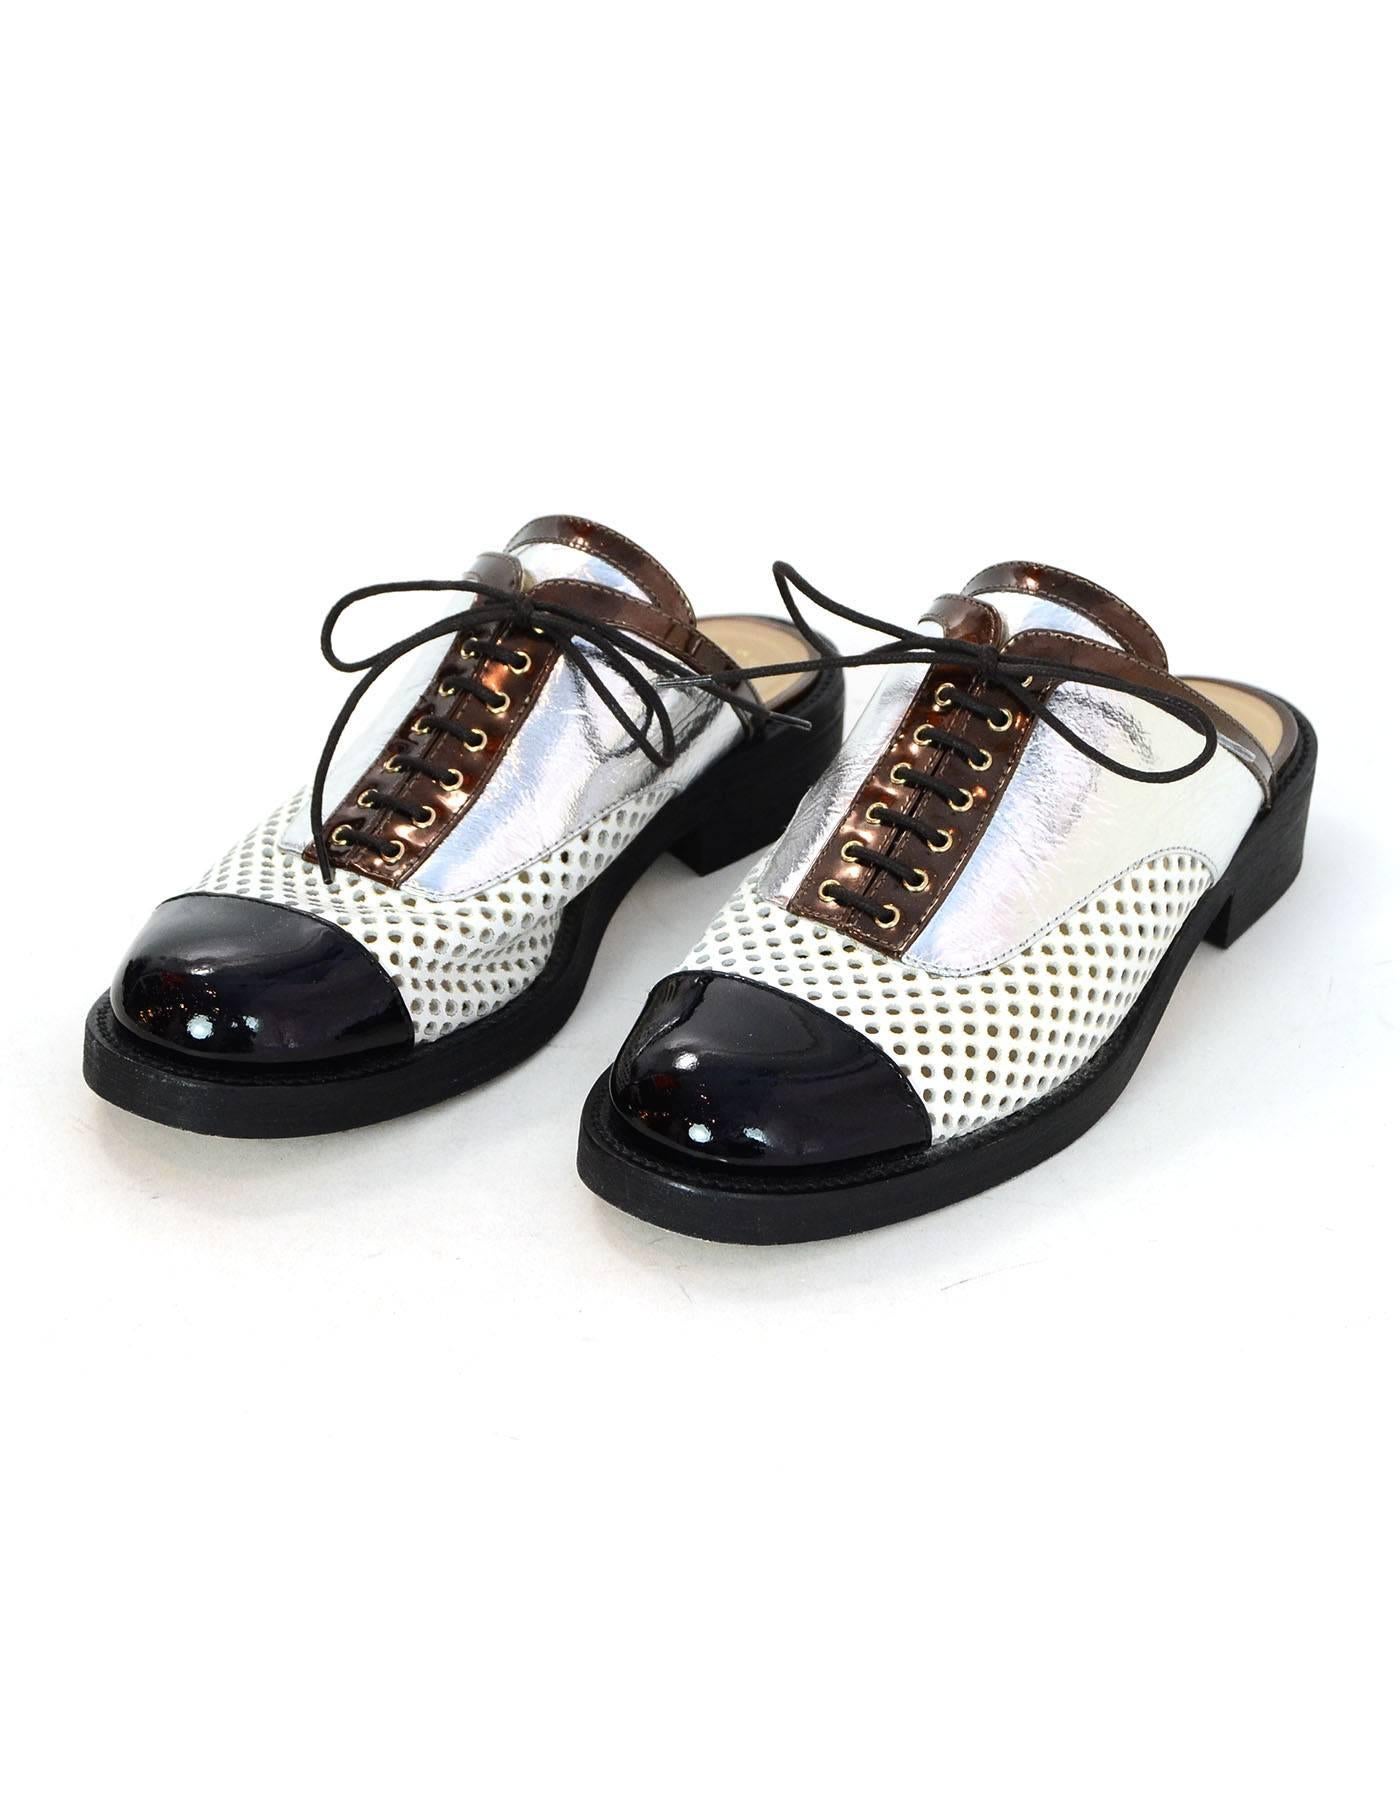 Chanel Black, White & Silver Paris/Cuba Perforated Mules Sz 40

Made In: Italy
Color: Black, white, silver, bronze
Materials: Leather, patent leather
Closure/Opening: Slide on with lace tie at vamp
Sole Stamp: CC 40 Made in Italy
Retail Price: